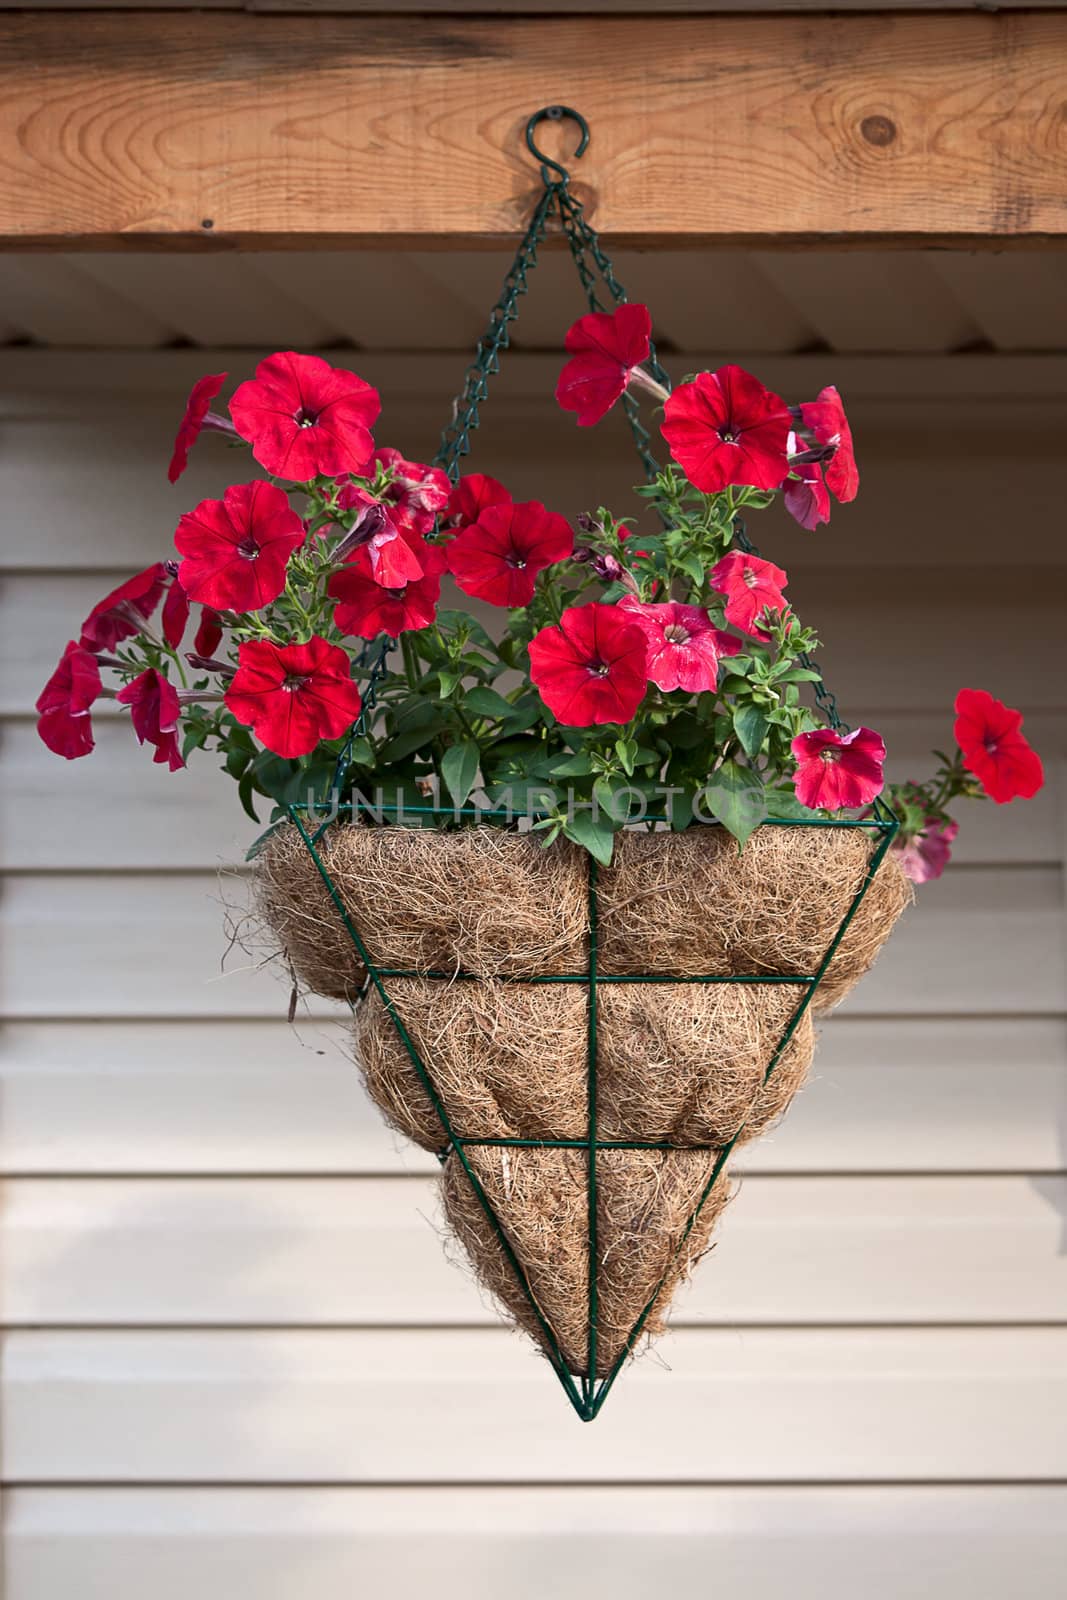 Red petunia in  hanging pot against  wall.